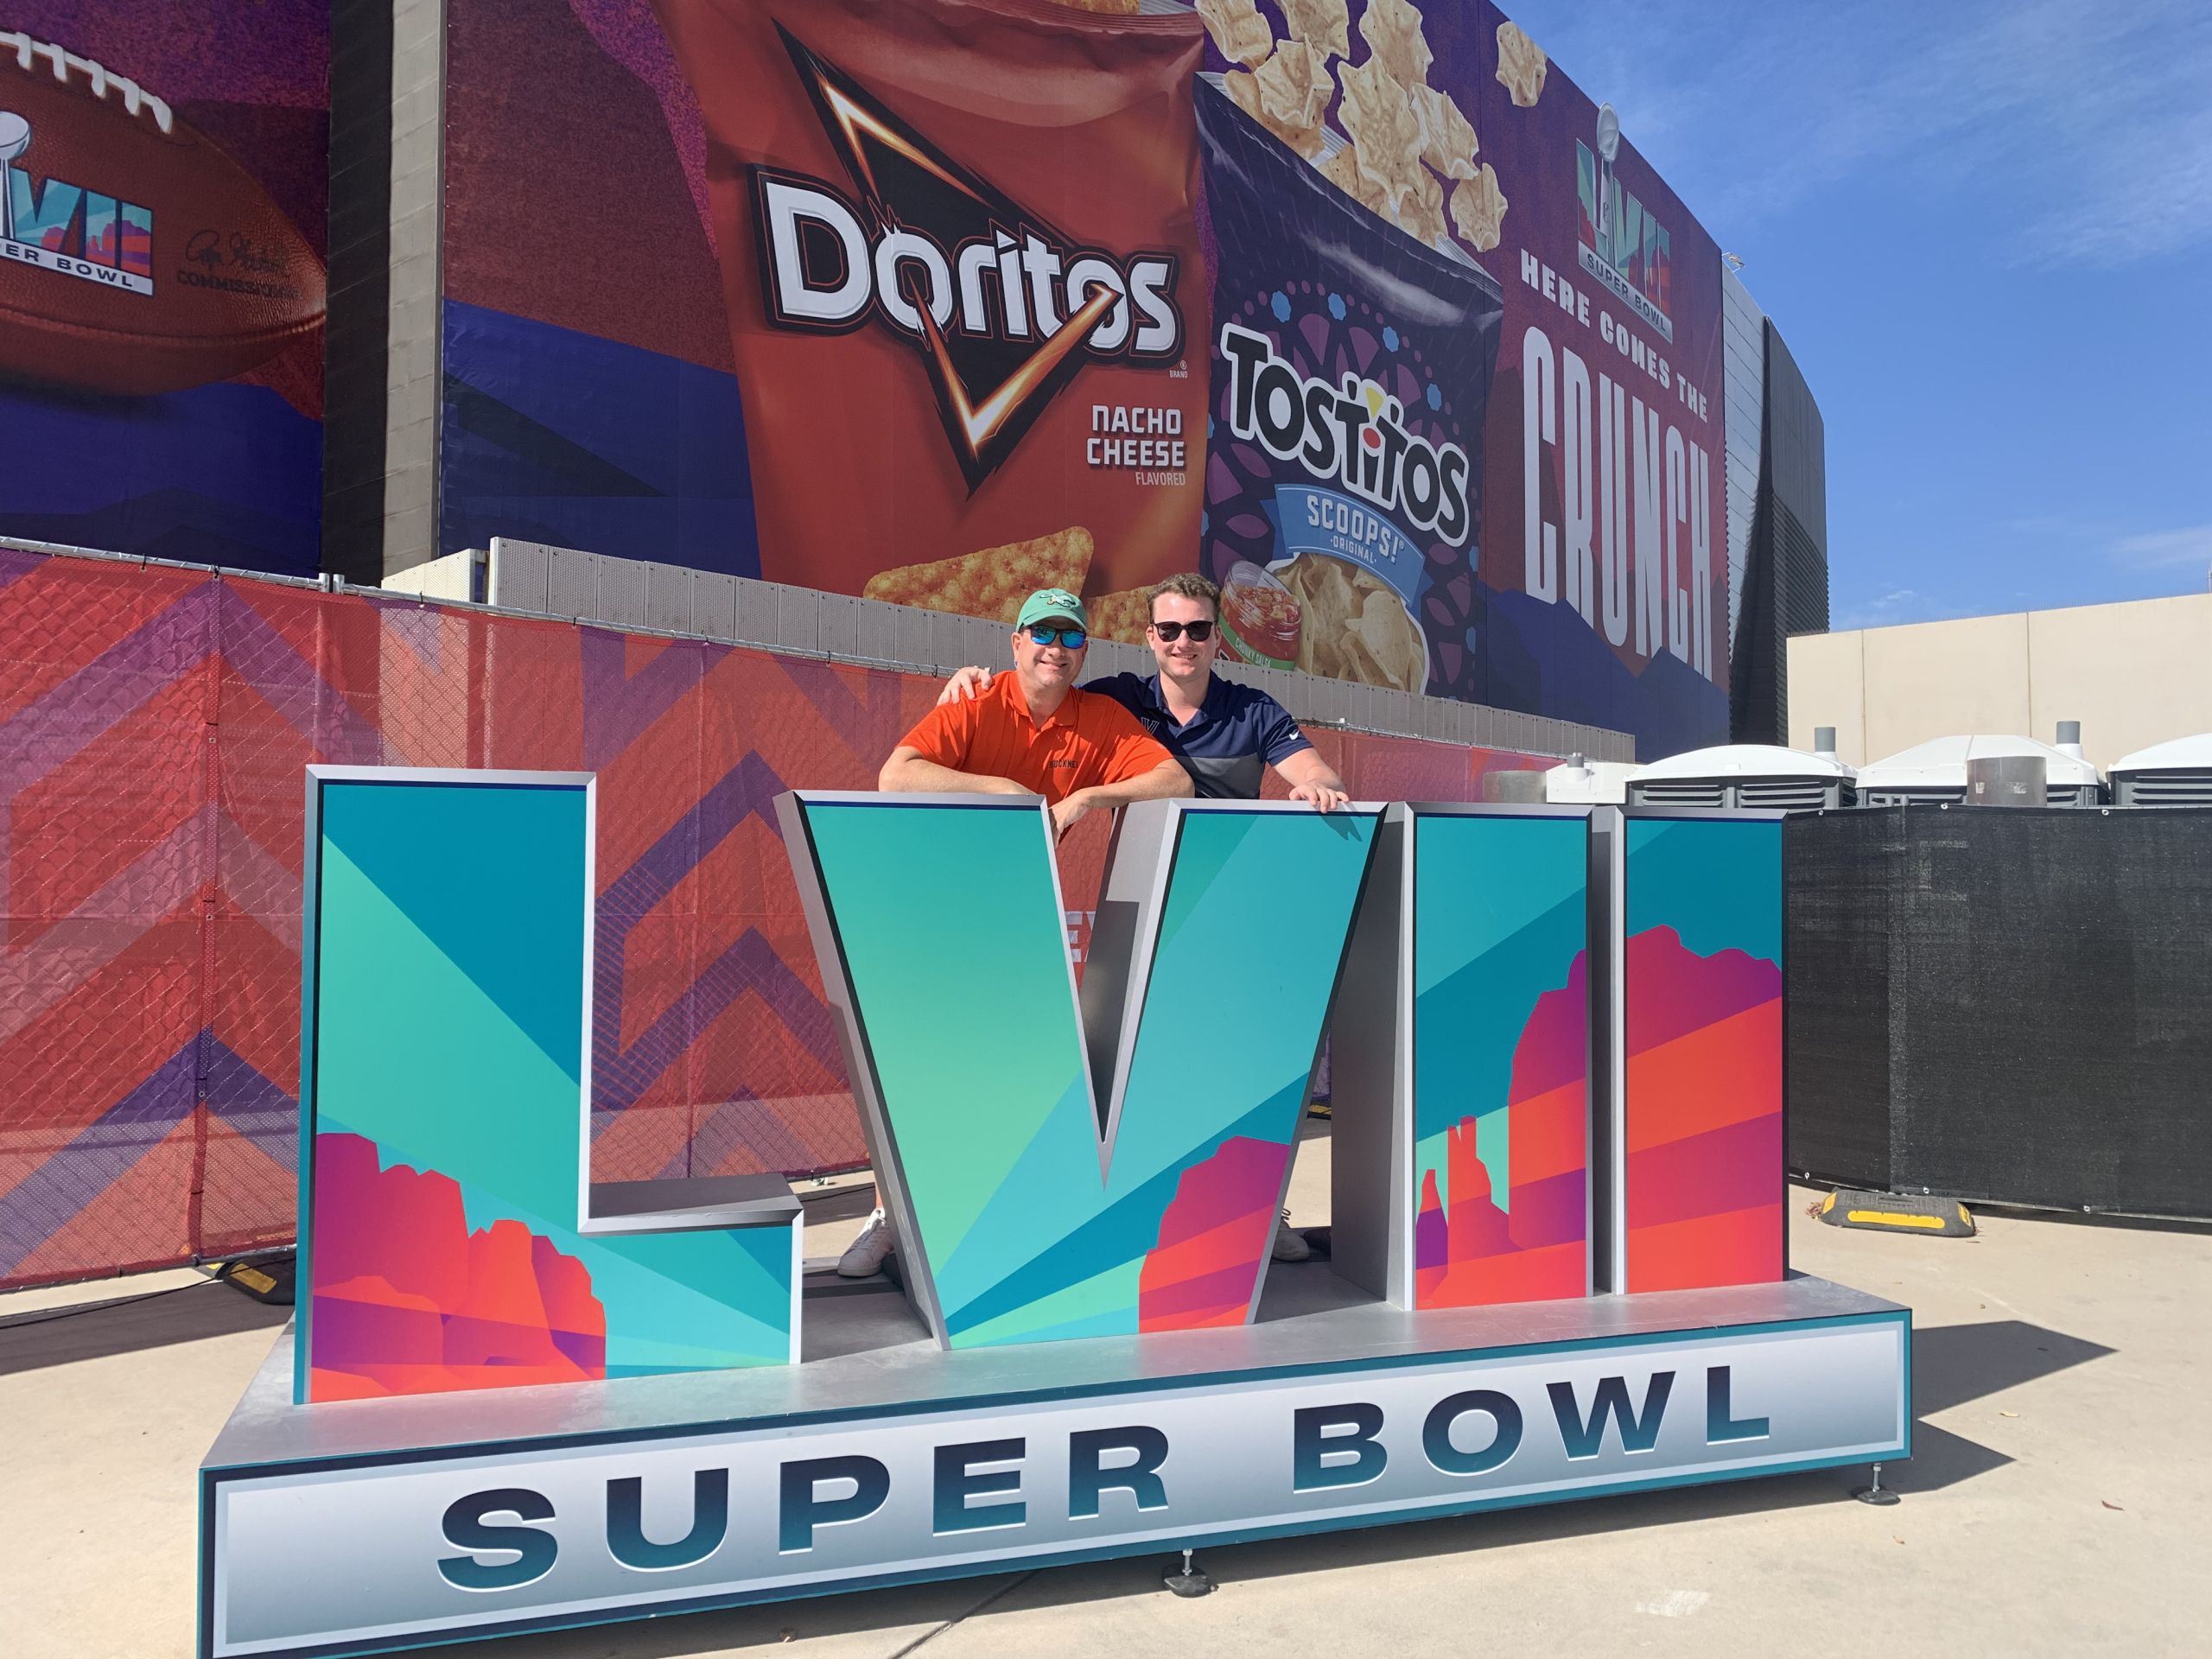 John Rader IV (L) pictured with his father, Cabrini Class of 1988, John Rader III (R) at the Super Bowl Experience in Phoenix, Arizona. Photo from John Rader.